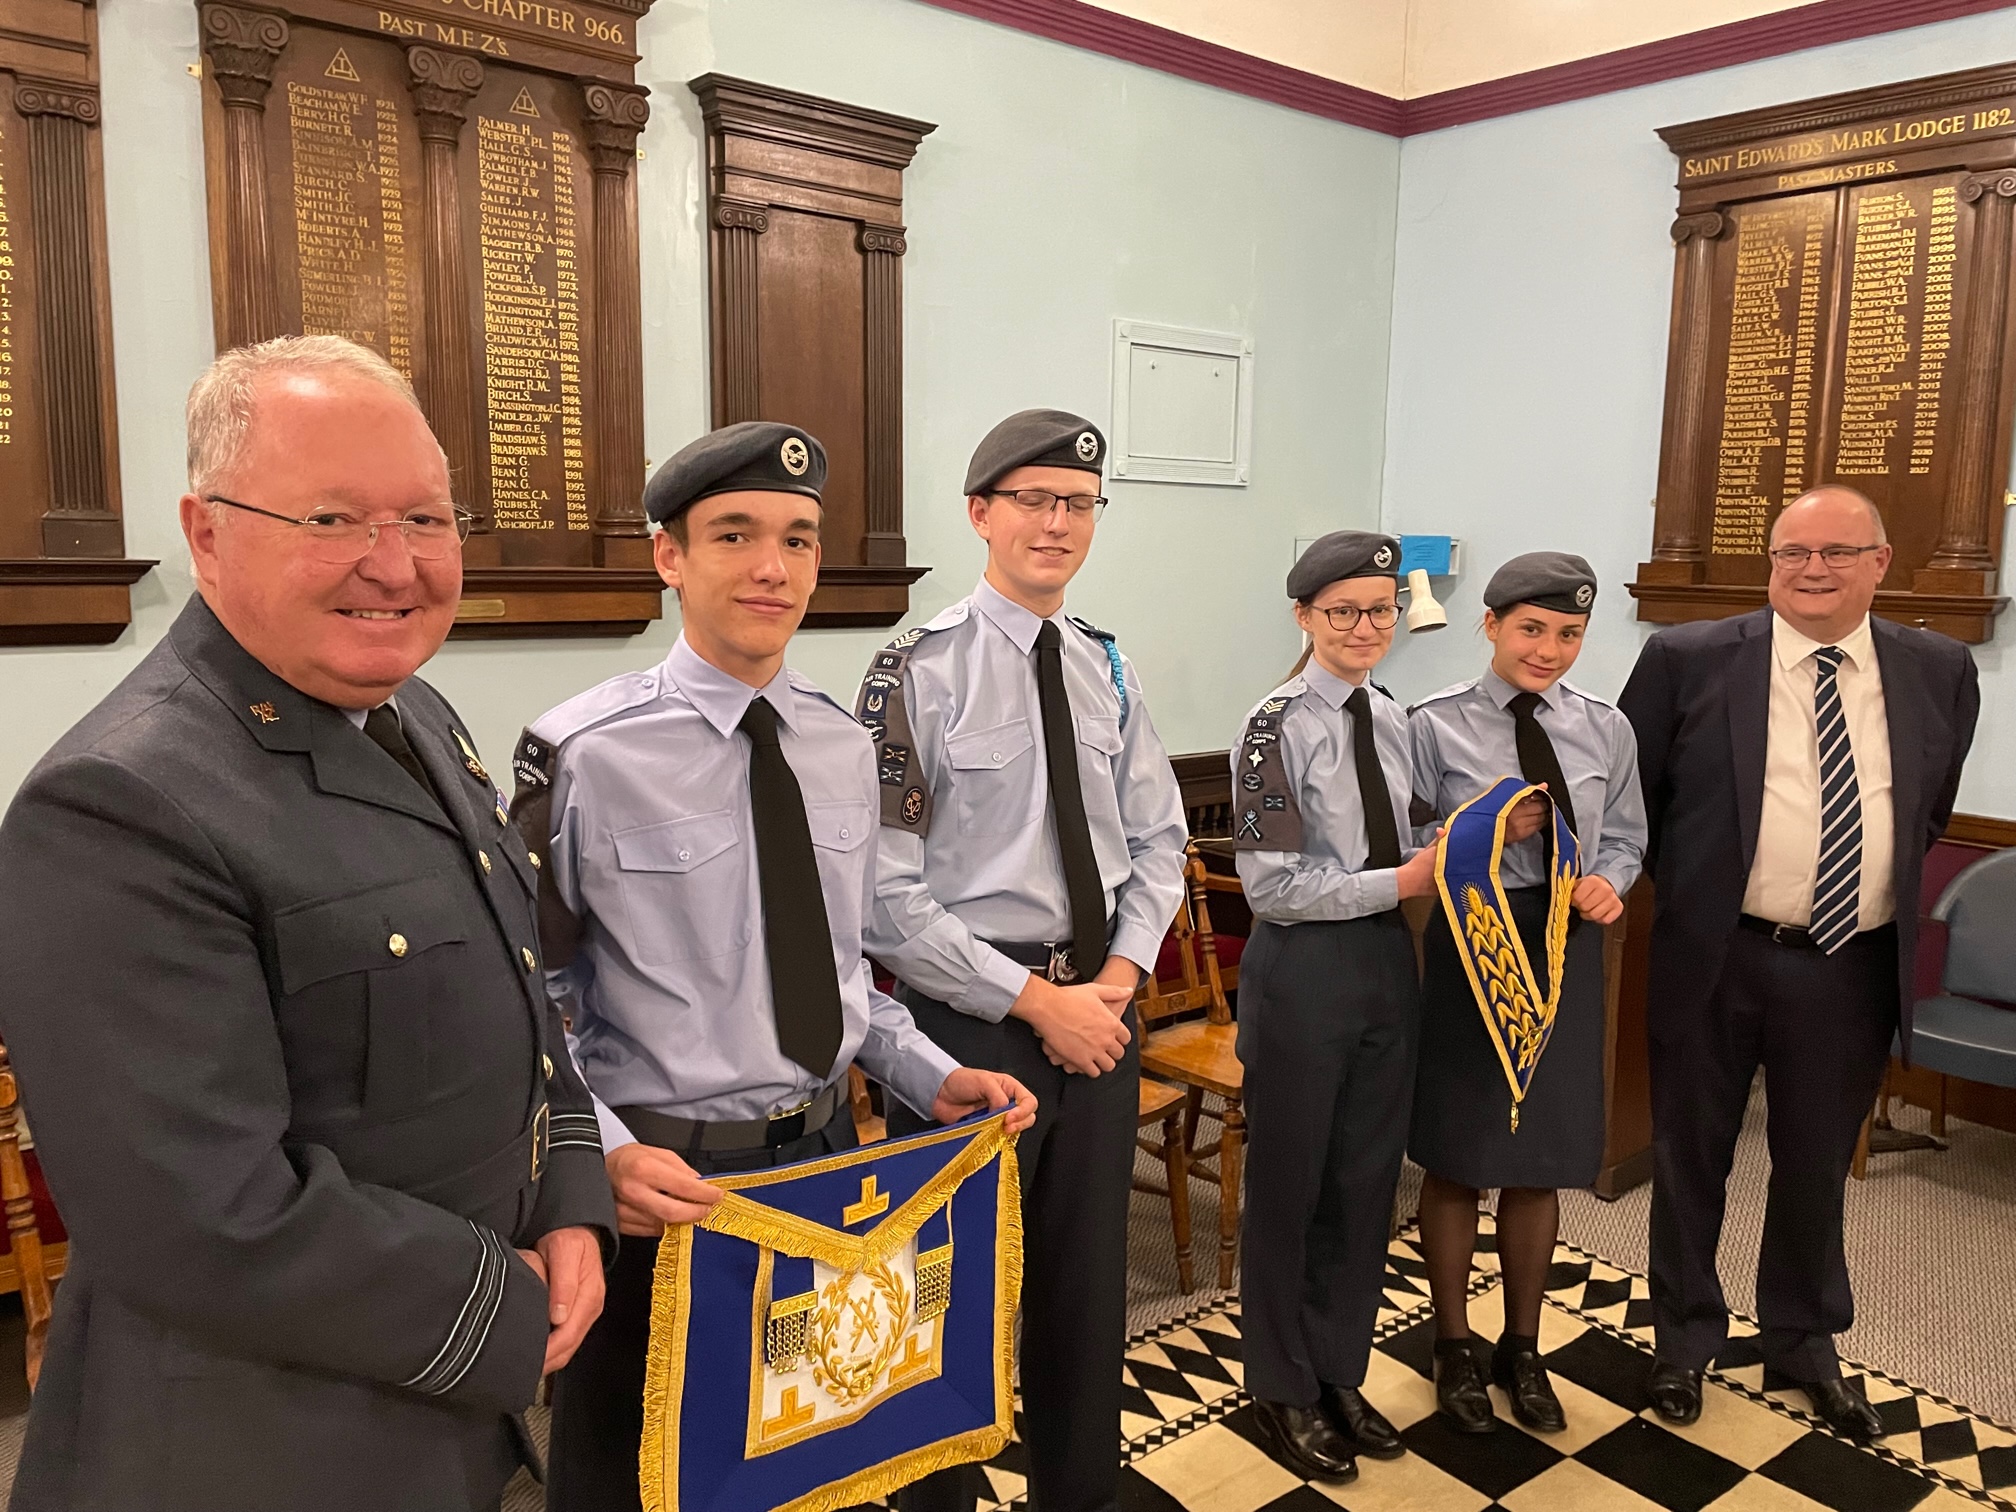 Leek Squadron Air Cadets welcomed by Freemasons to the Masonic Hall in Leek, Staffordshire